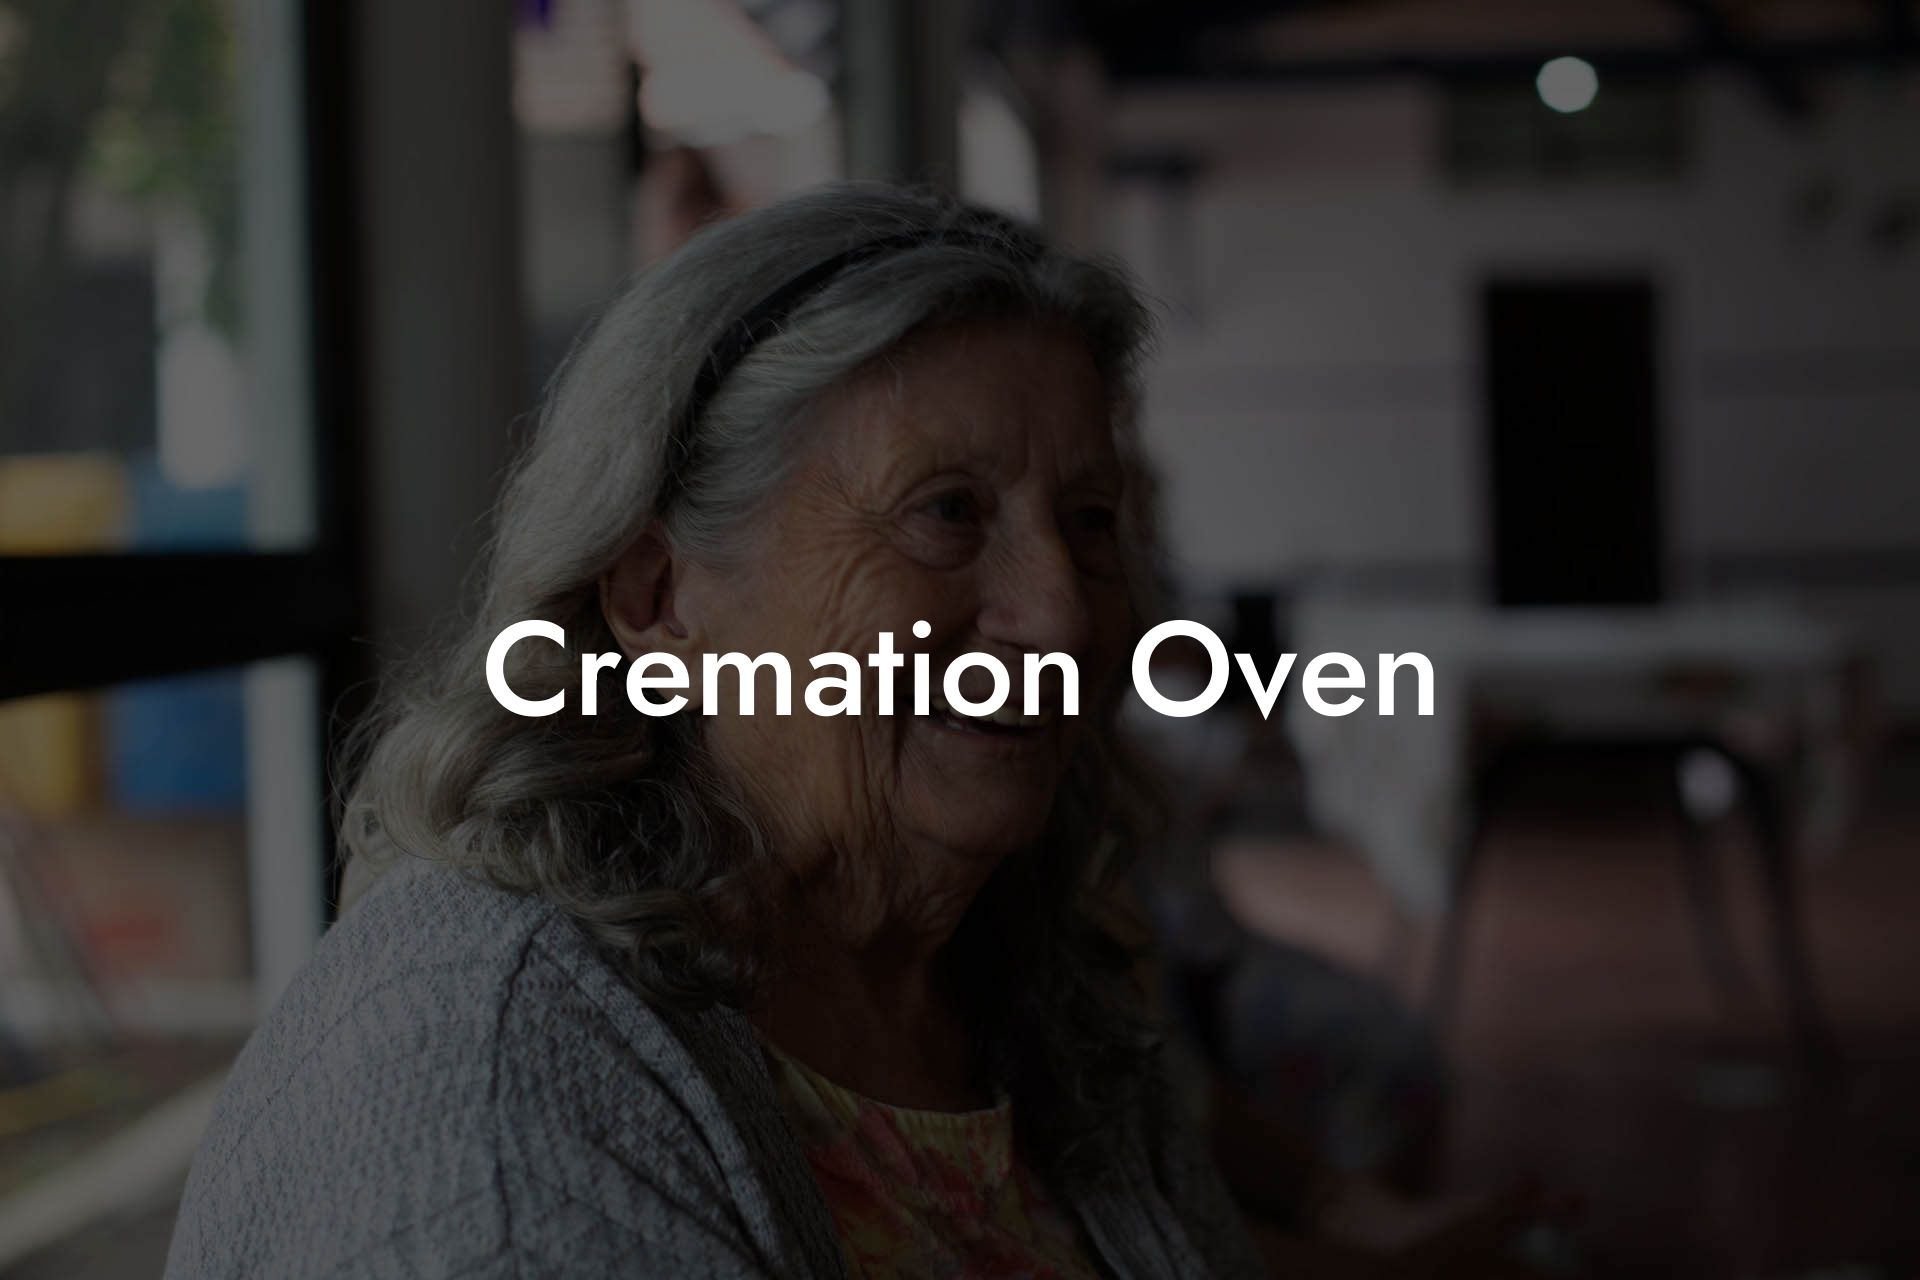 Cremation Oven